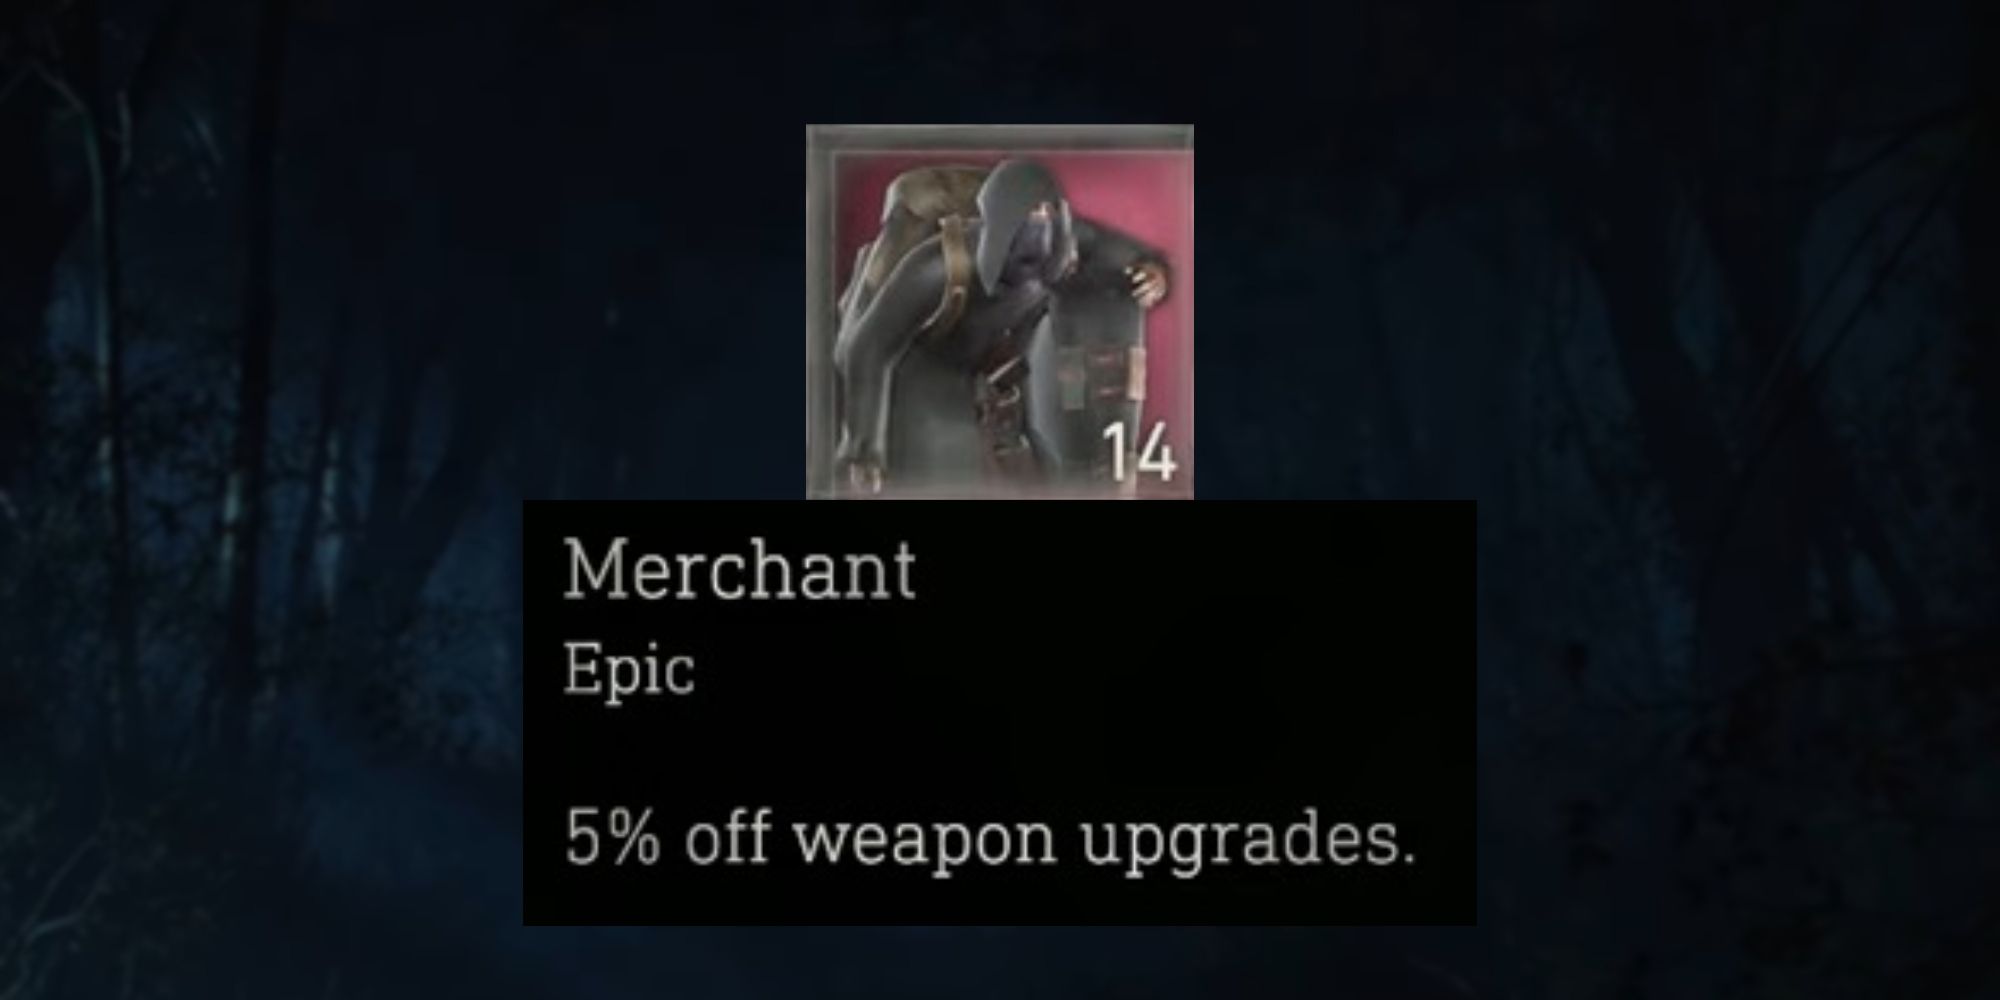 The Merchant charm from Resident Evil 4 Remake.